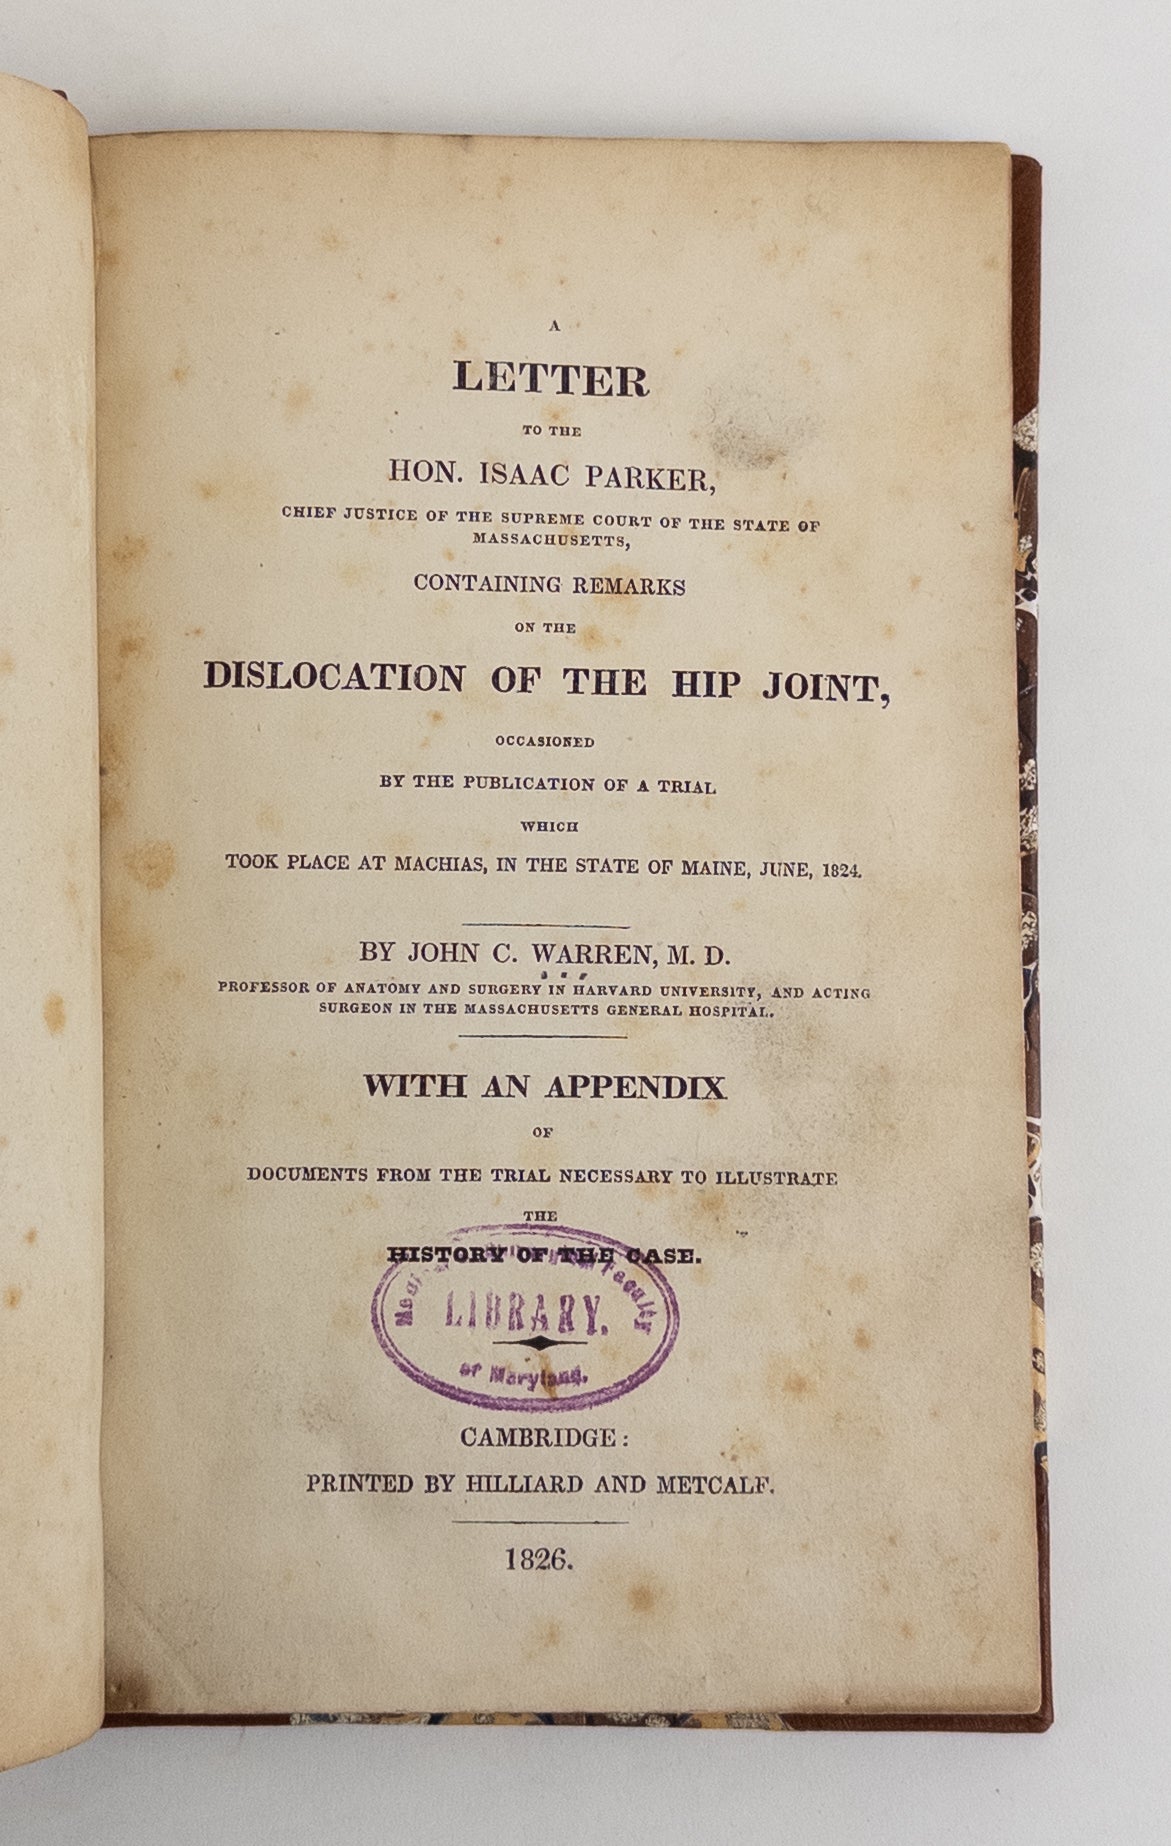 Product Image for A LETTER TO THE HON. ISAAC PARKER, CHIEF JUSTICE OF THE SUPREME COURT OF THE STATE OF MASSACHUSETTS, CONTAINING REMARKS ON THE DISLOCATION OF THE HIP JOINT, OCCASIONED BY THE PUBLICATION OF A TRIAL WHICH TOOK PLACE AT MACHIAS, IN THE STATE OF MAINE, JUNE 